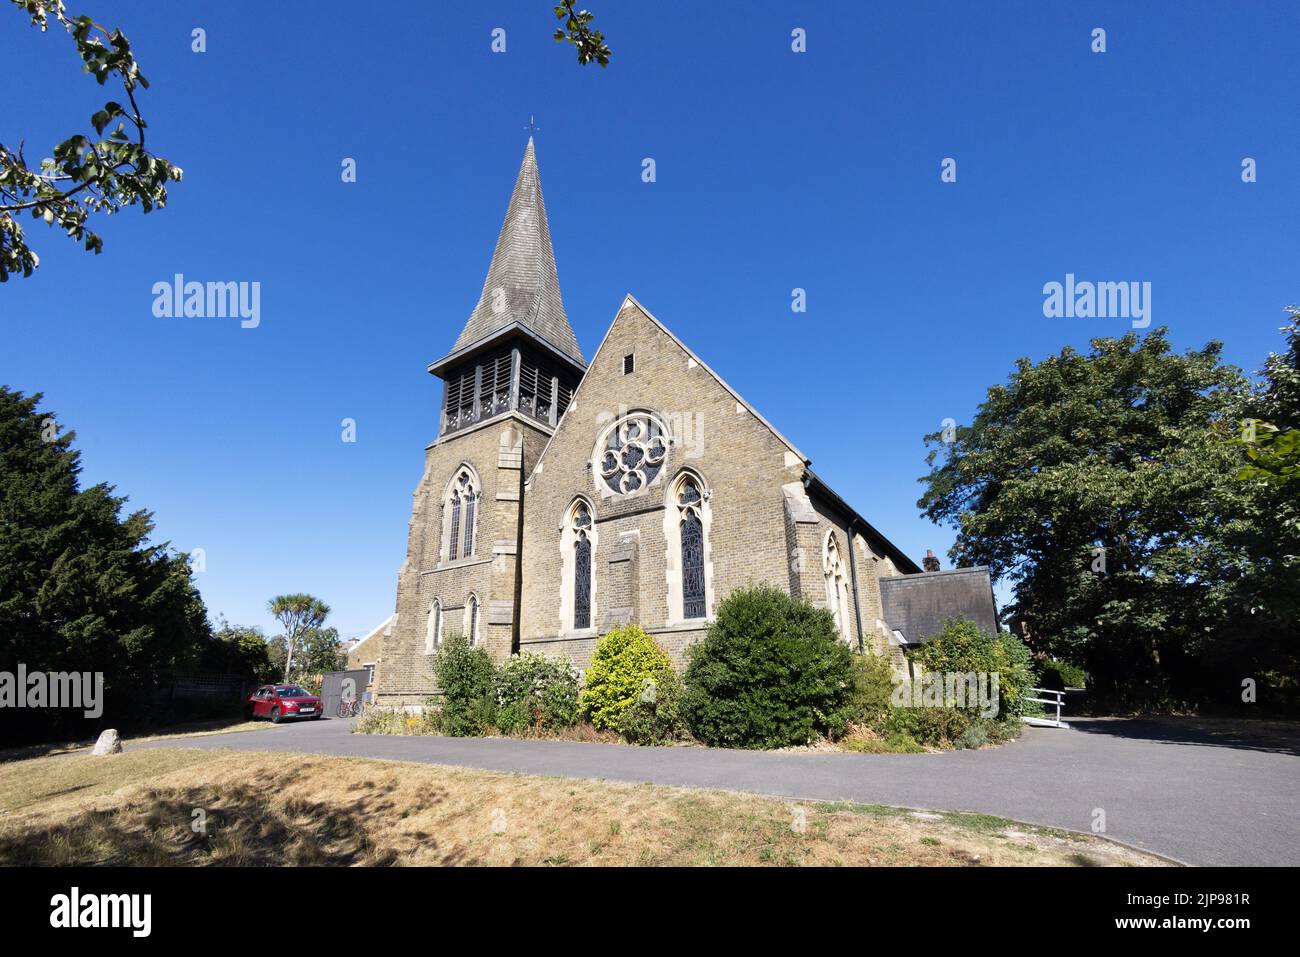 London anglican church; Christ Church, Colliers Wood London exterior on a sunny summer day, Colliers Wood, Merton, London UK Stock Photo